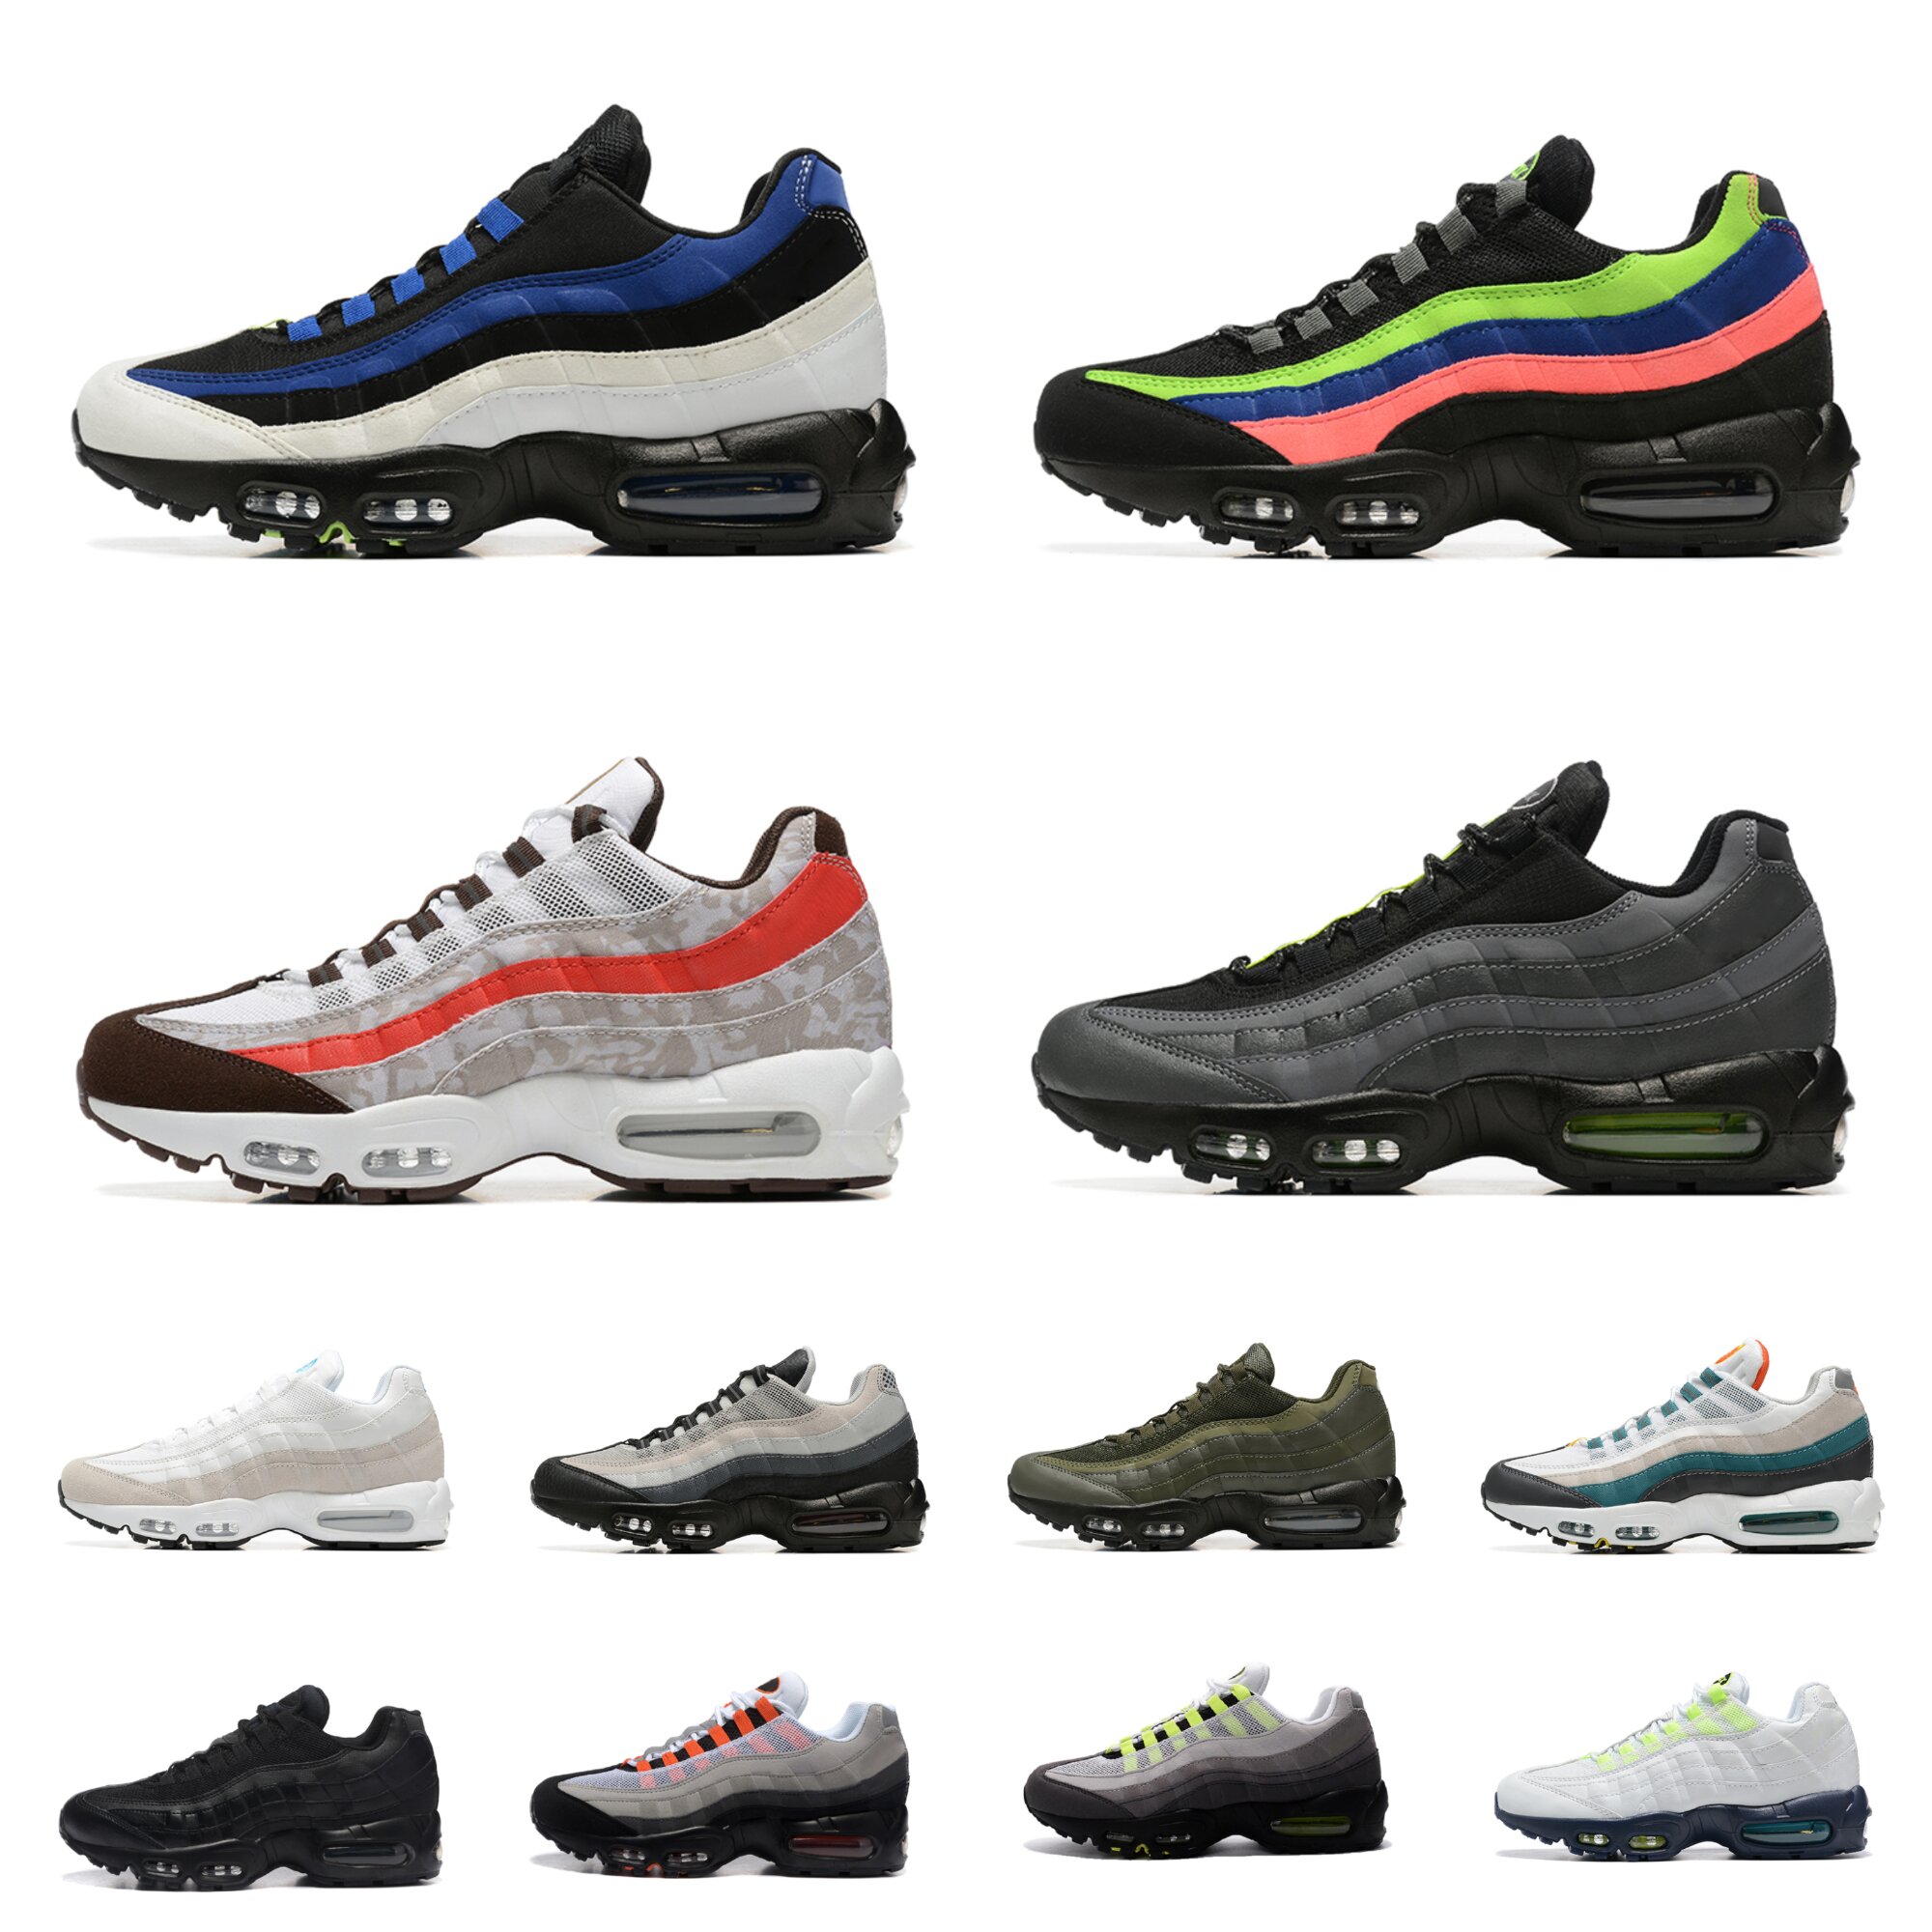 

Shoes Running 95 Airmaxs Max 95s Triple Black White Air Neon Greedy Solar Red Sneakers 20th Anniversary Ultra Olive Blue Reflective Designer, L018